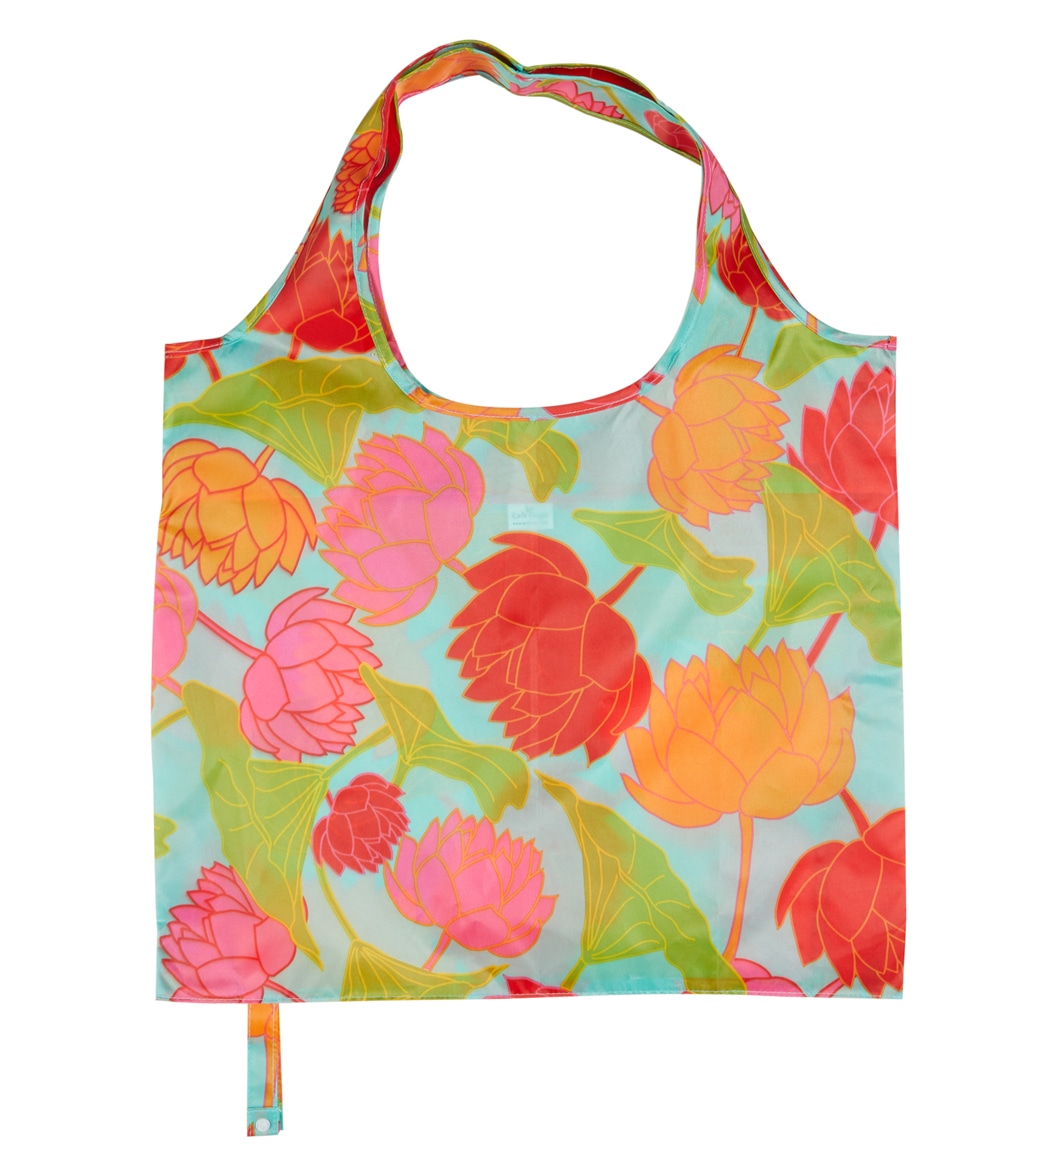 Envbags Lotus Water Resistant Tote Bag - Multi One Size Polyester - Swimoutlet.com